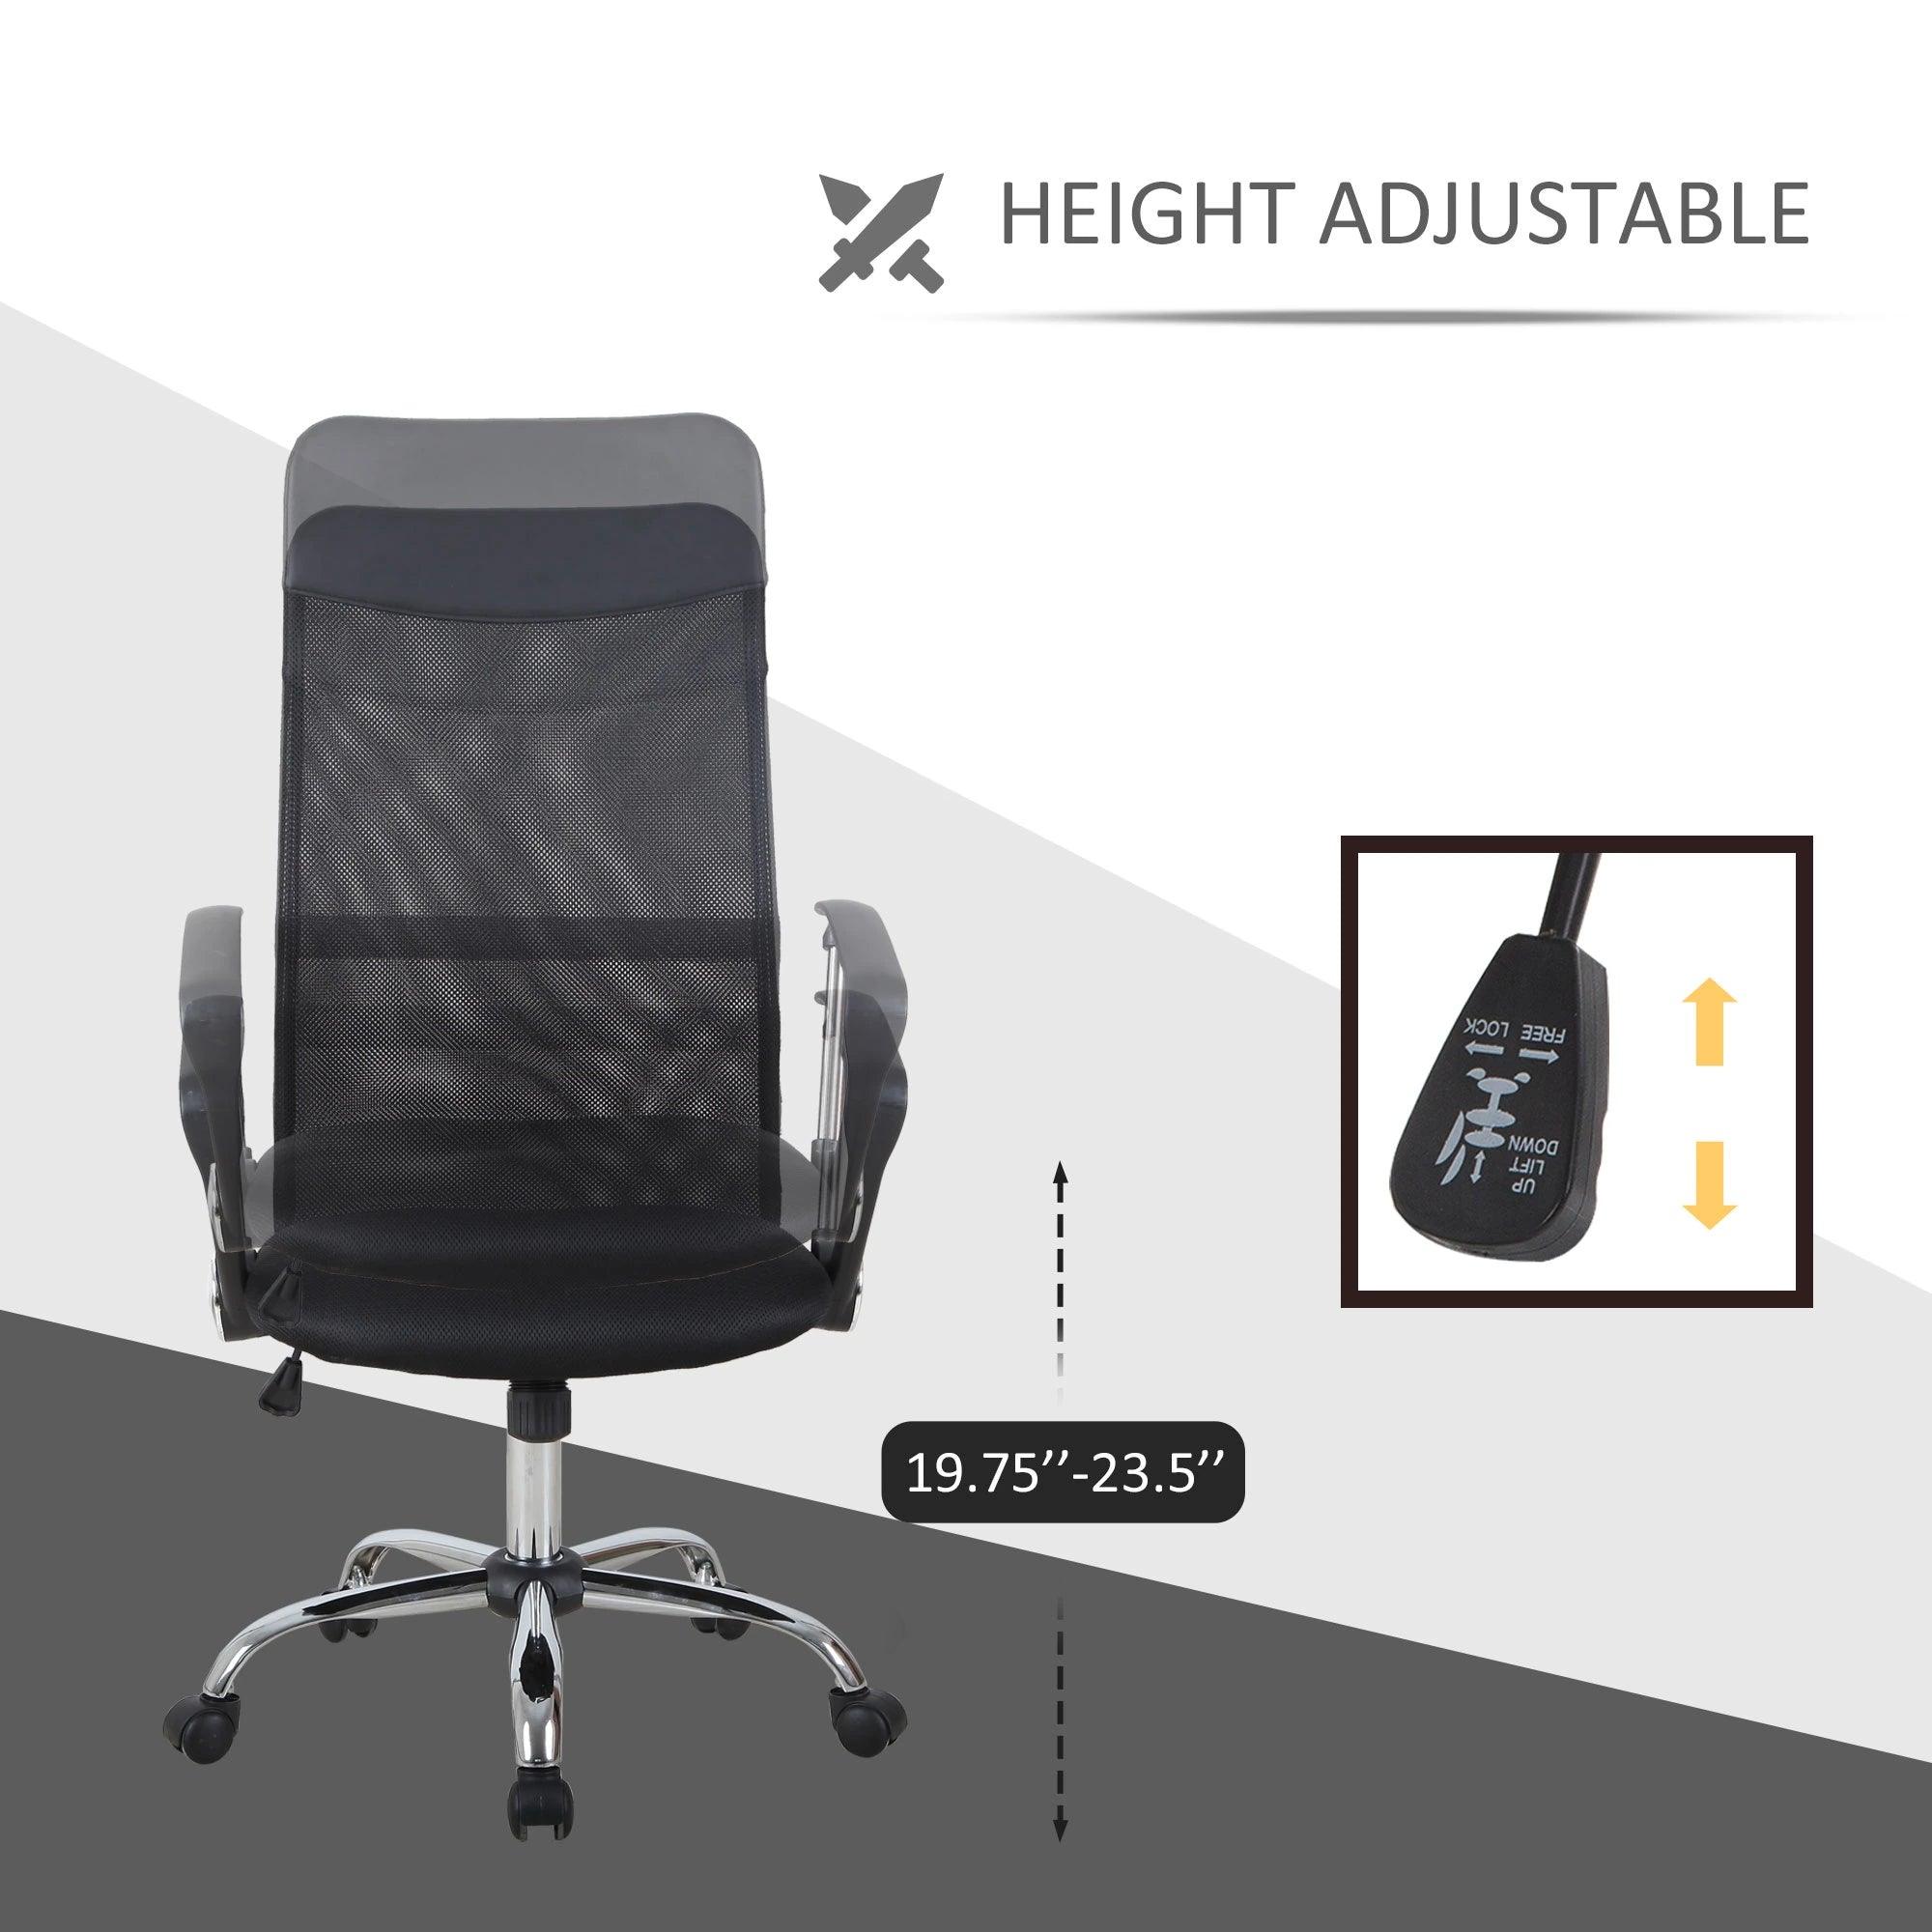 Mesh Office Chair, High Back Desk Chair, Swivel Computer Chair with Adjustable Height, Wheels, Black